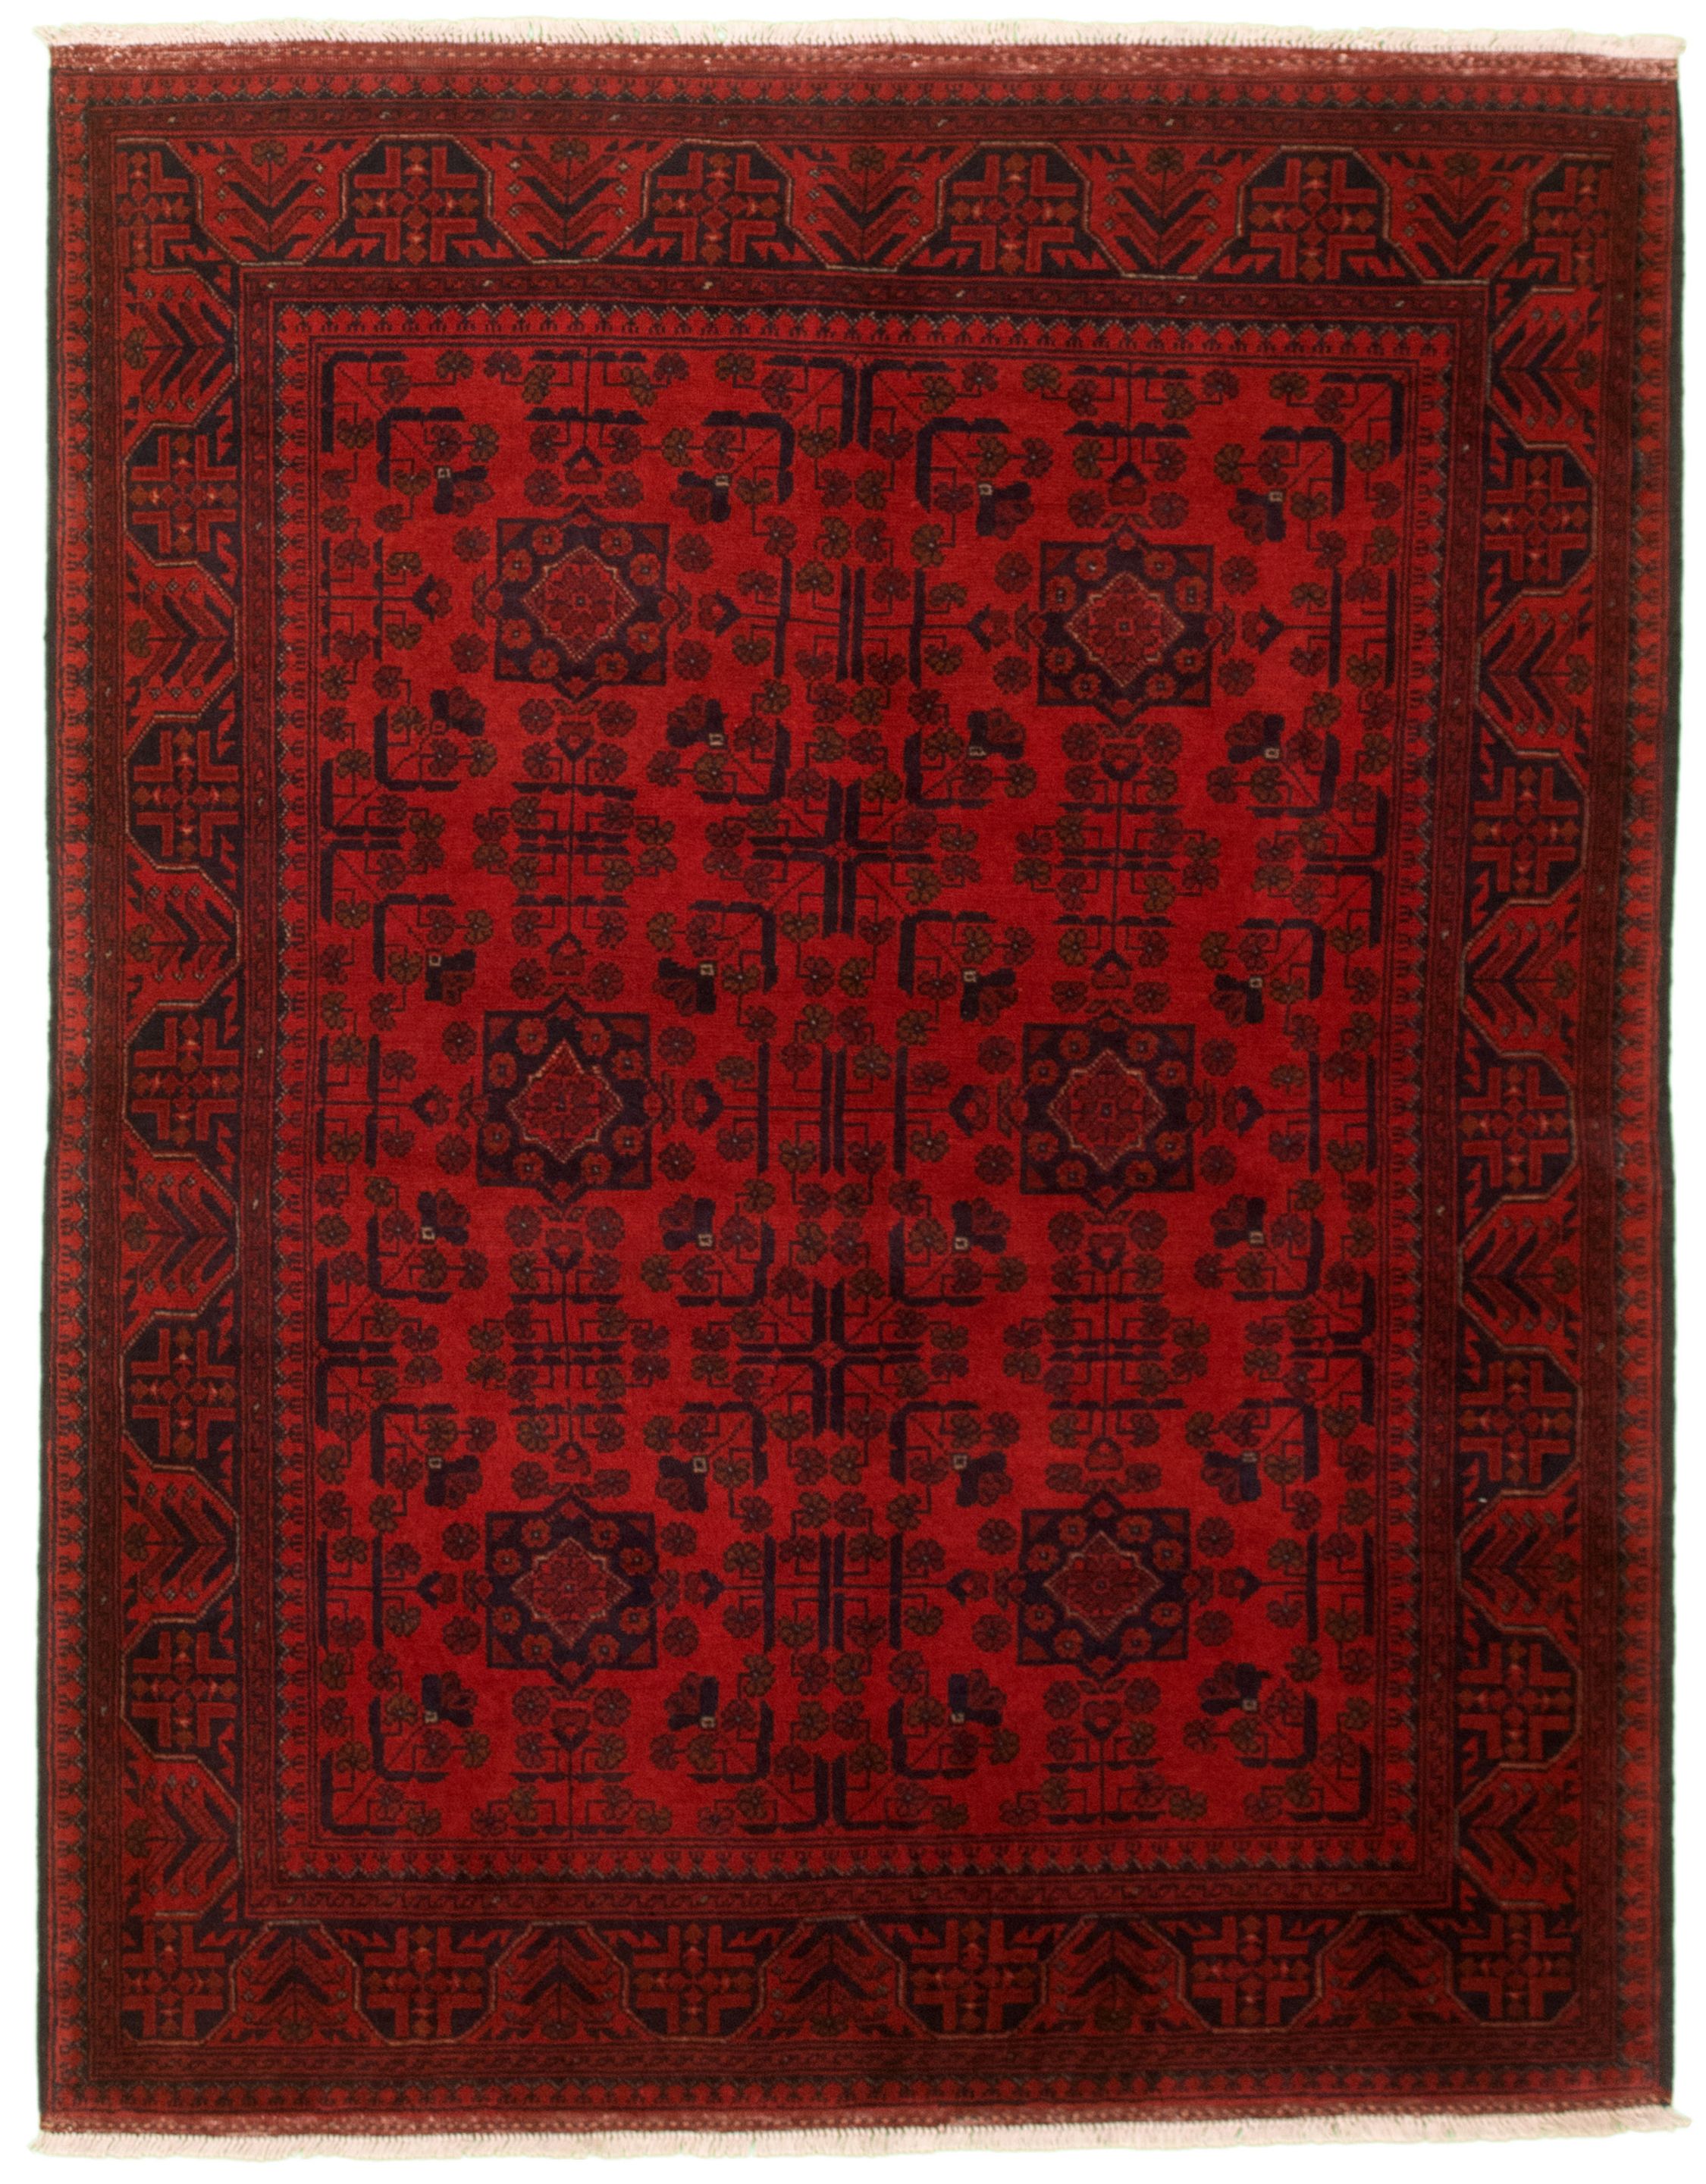 Hand-knotted Finest Khal Mohammadi Red Wool Rug 5'1" x 6'8"  Size: 5'1" x 6'8"  